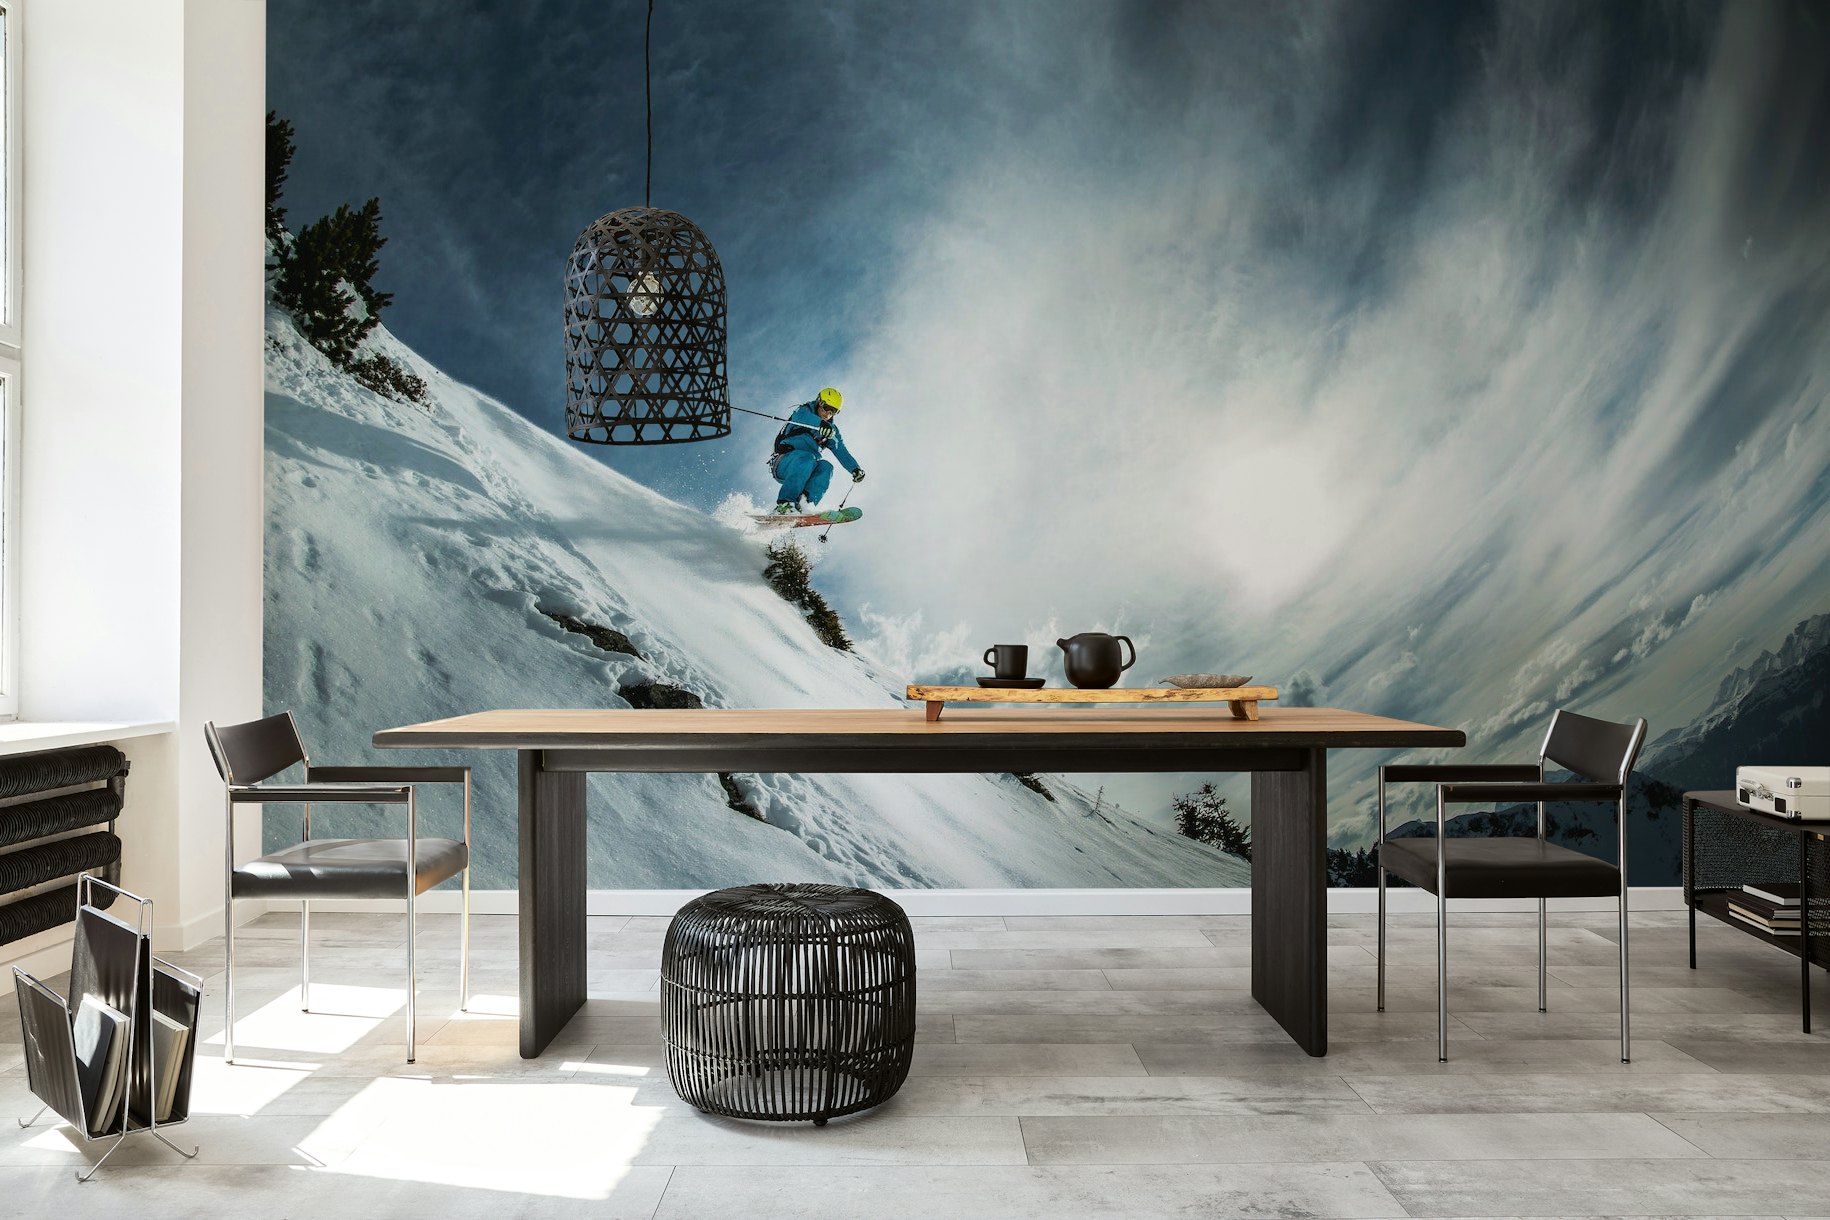 Theo de La Soujeole at home in Flaine wallpaper